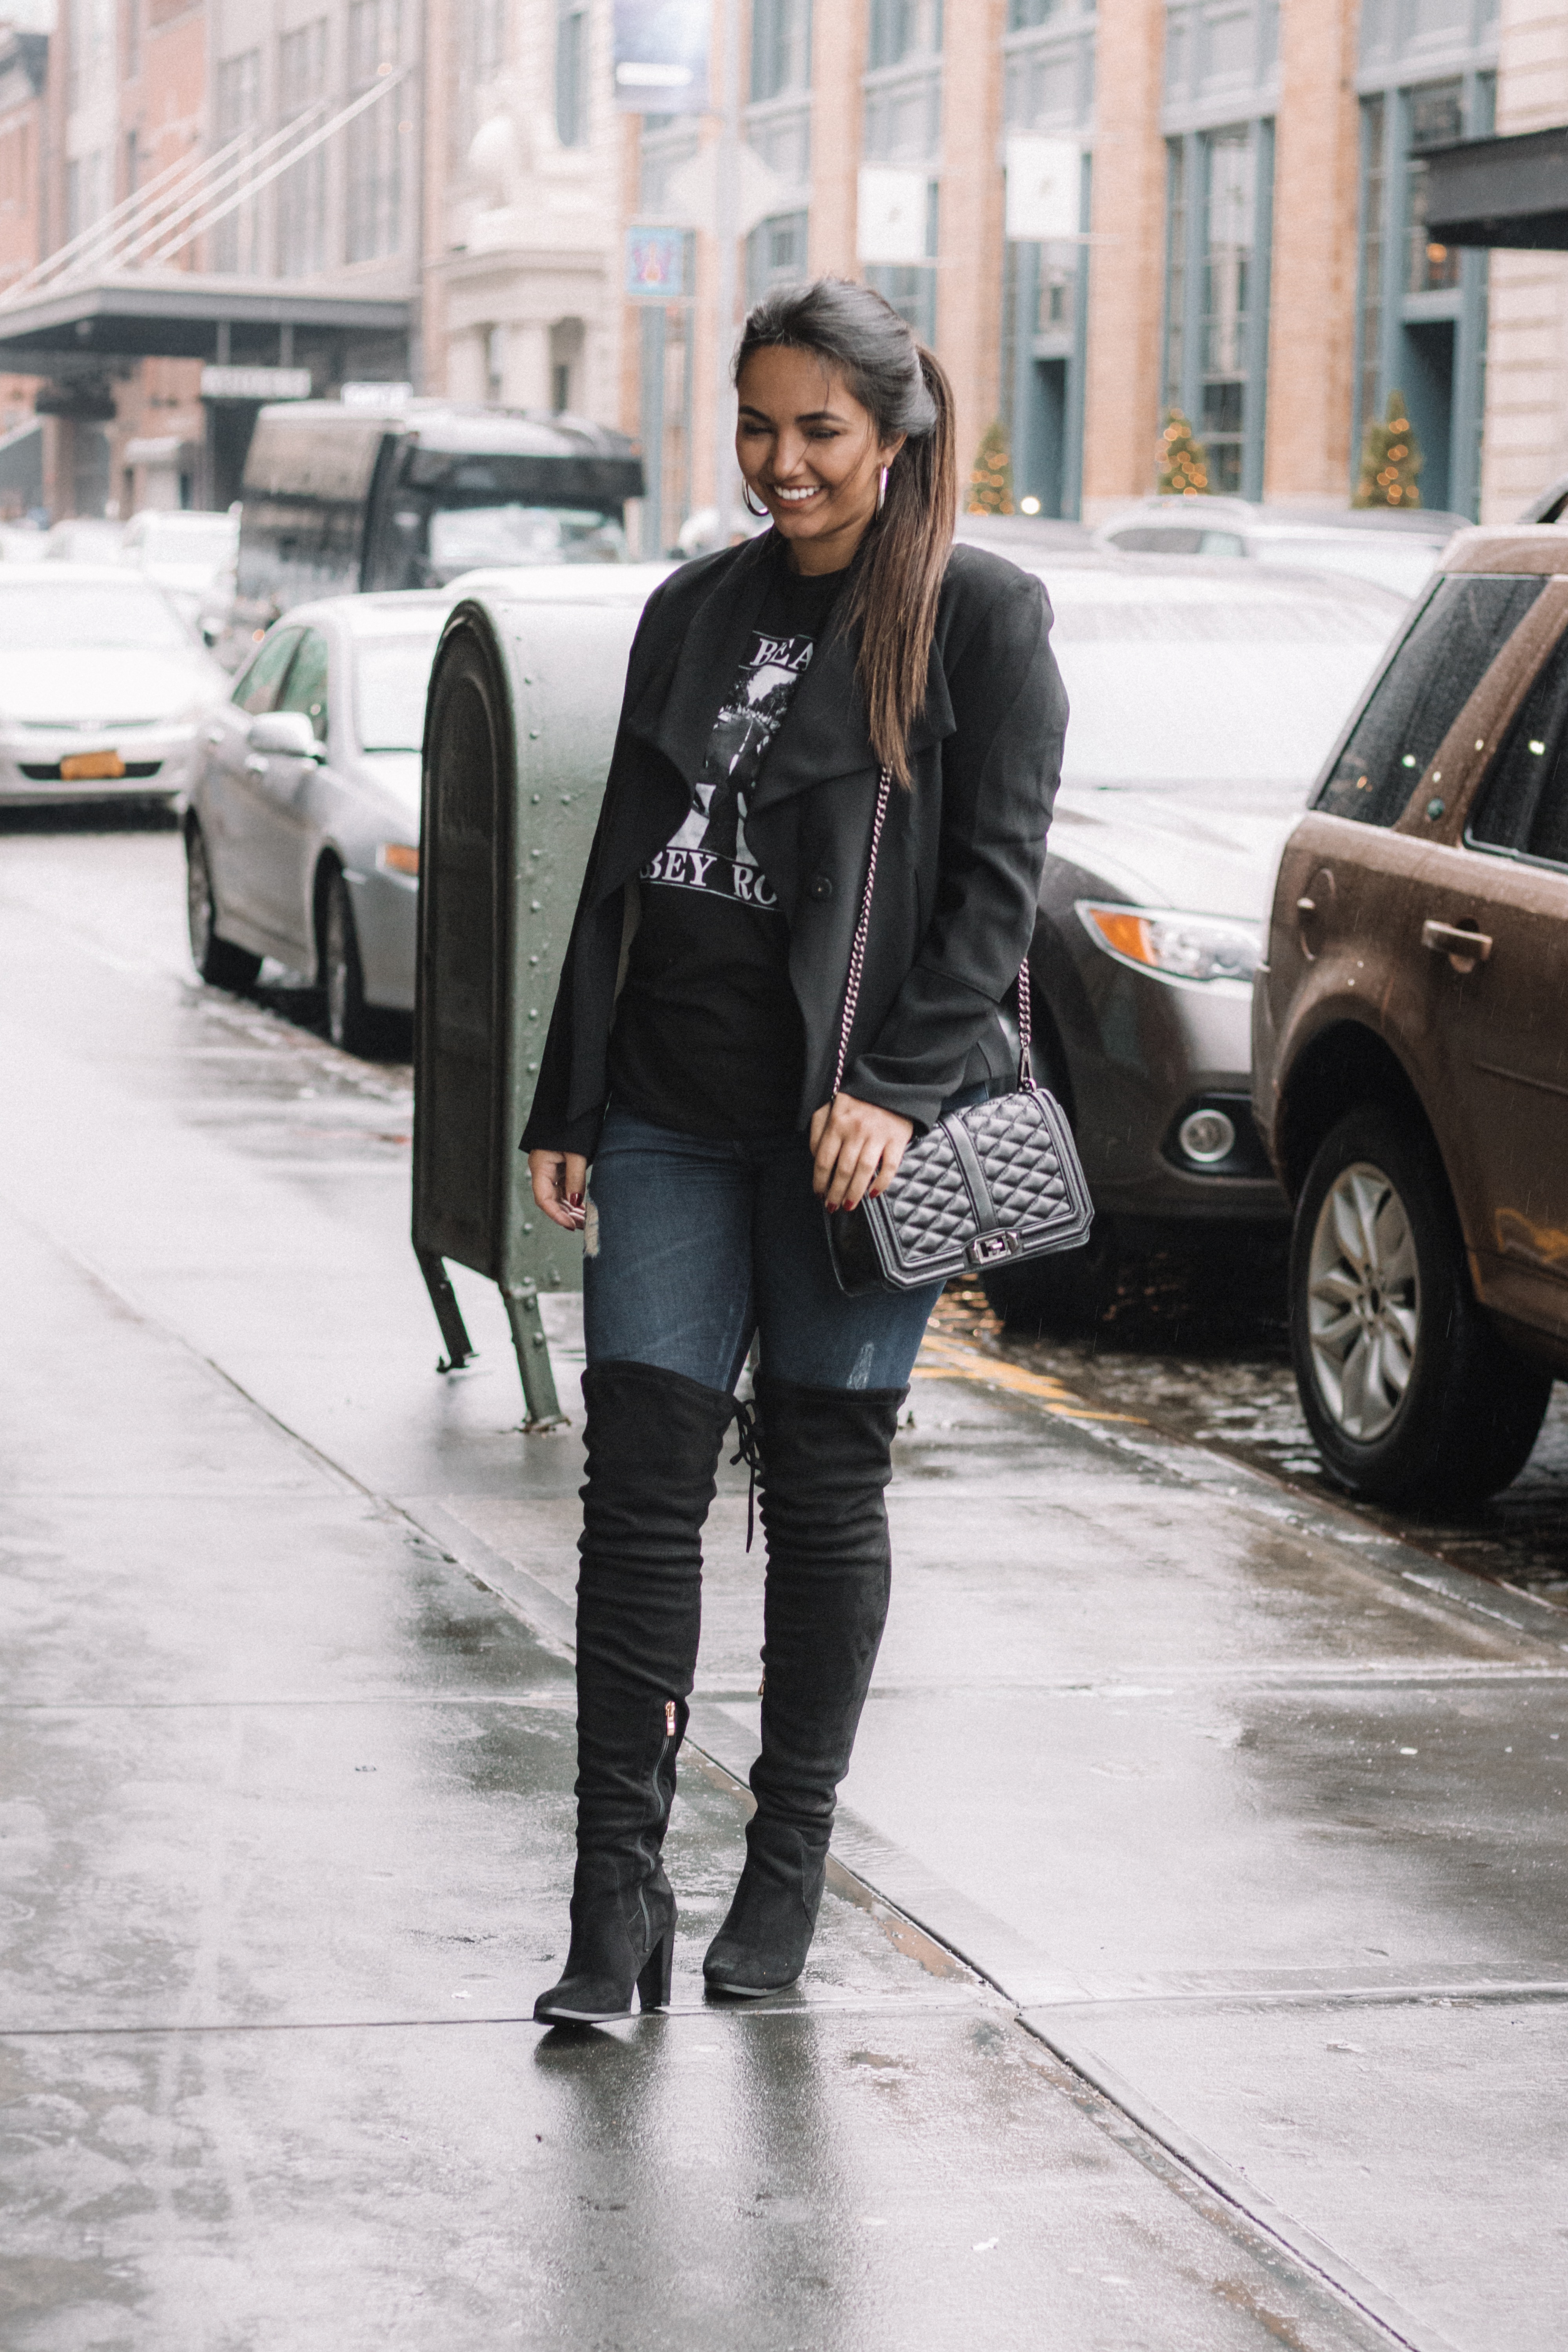 Over the knee boots, skinny jeans, blazer, graphic tee